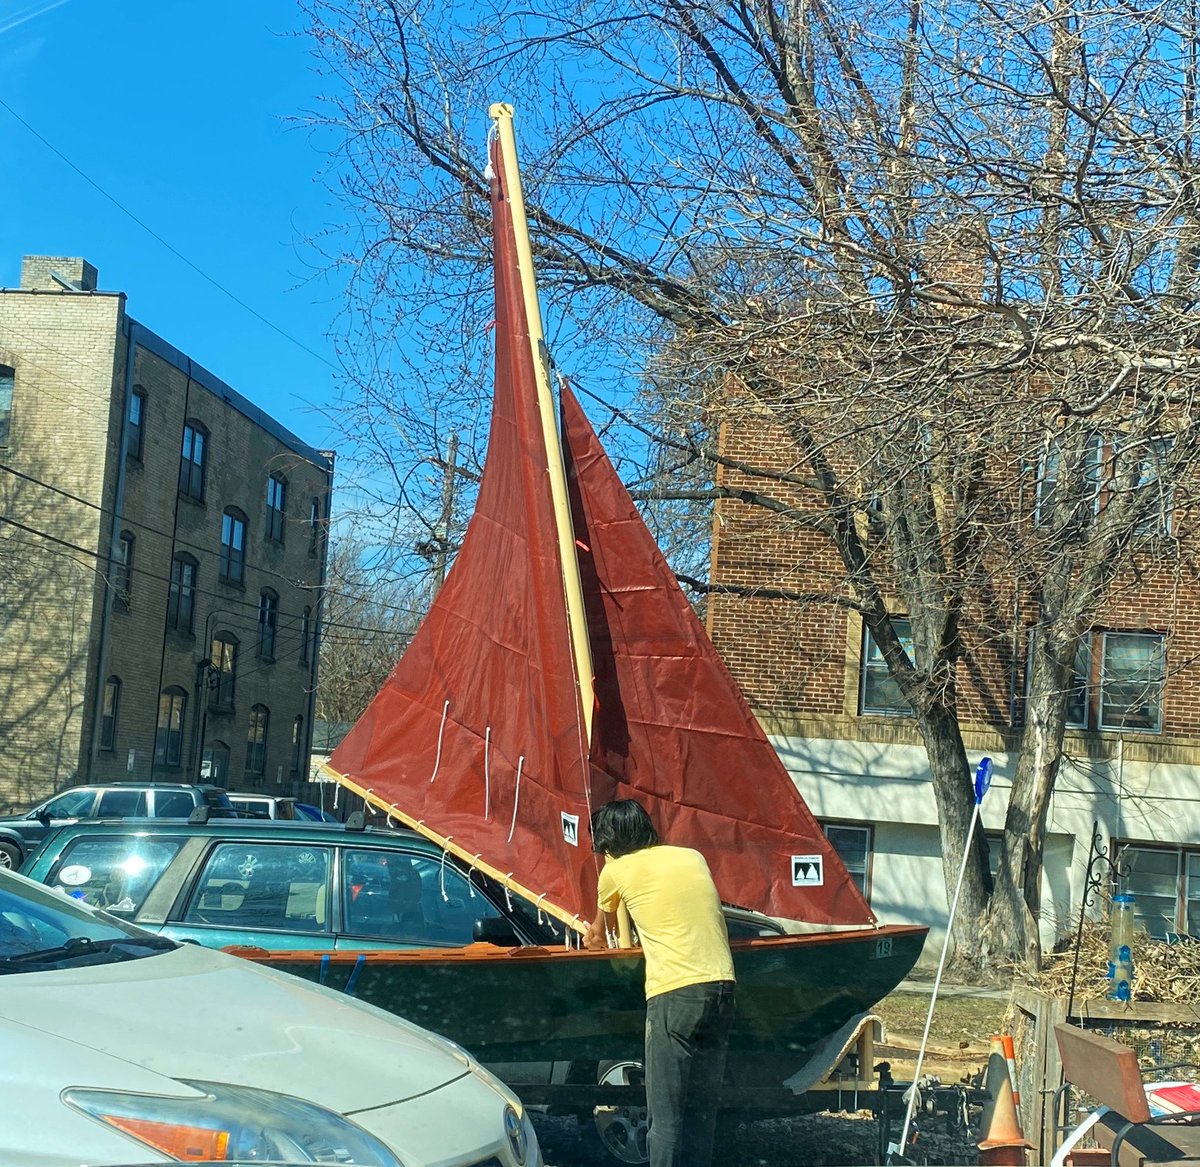 Update: there’s a sail now!